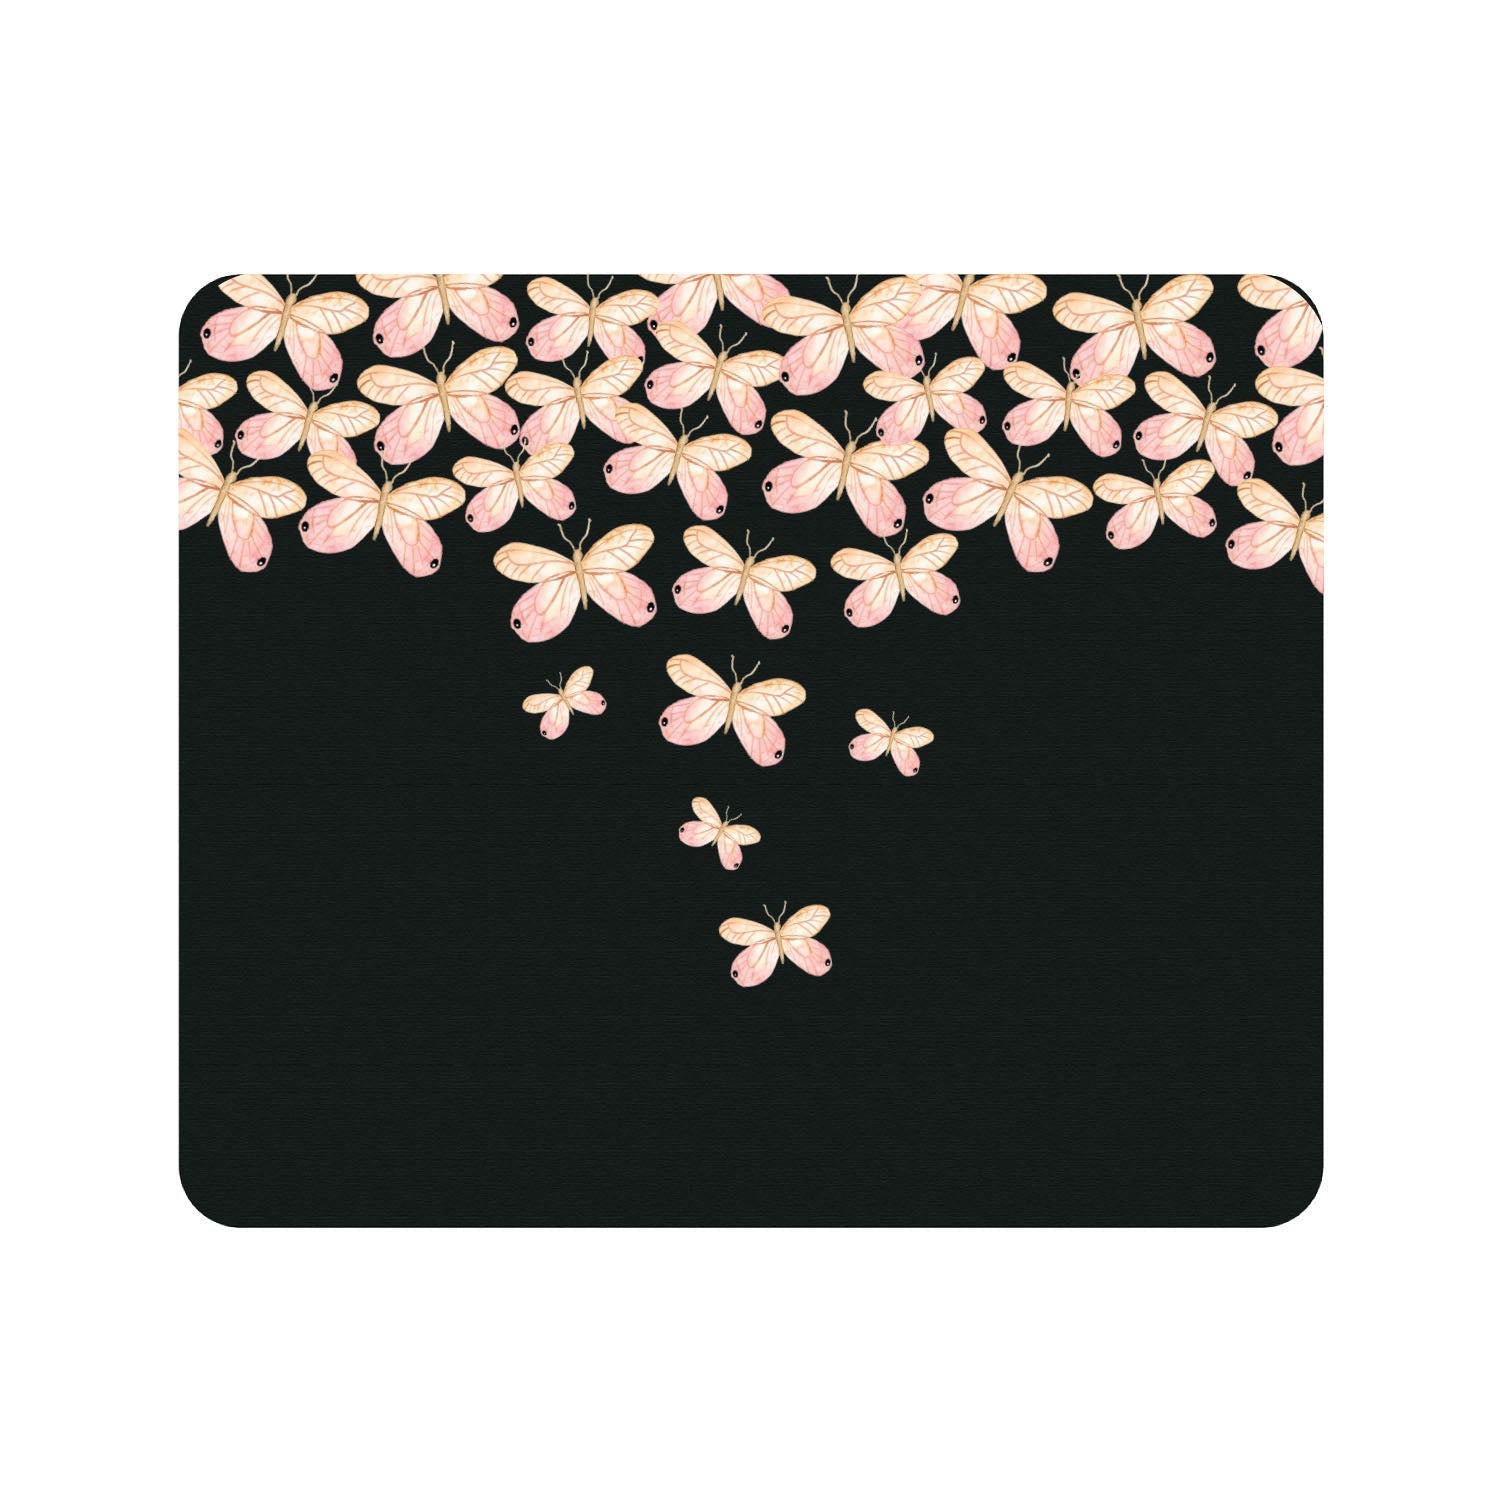 OTM Essentials Prints Series Mouse Pad, Butterfly Dreams